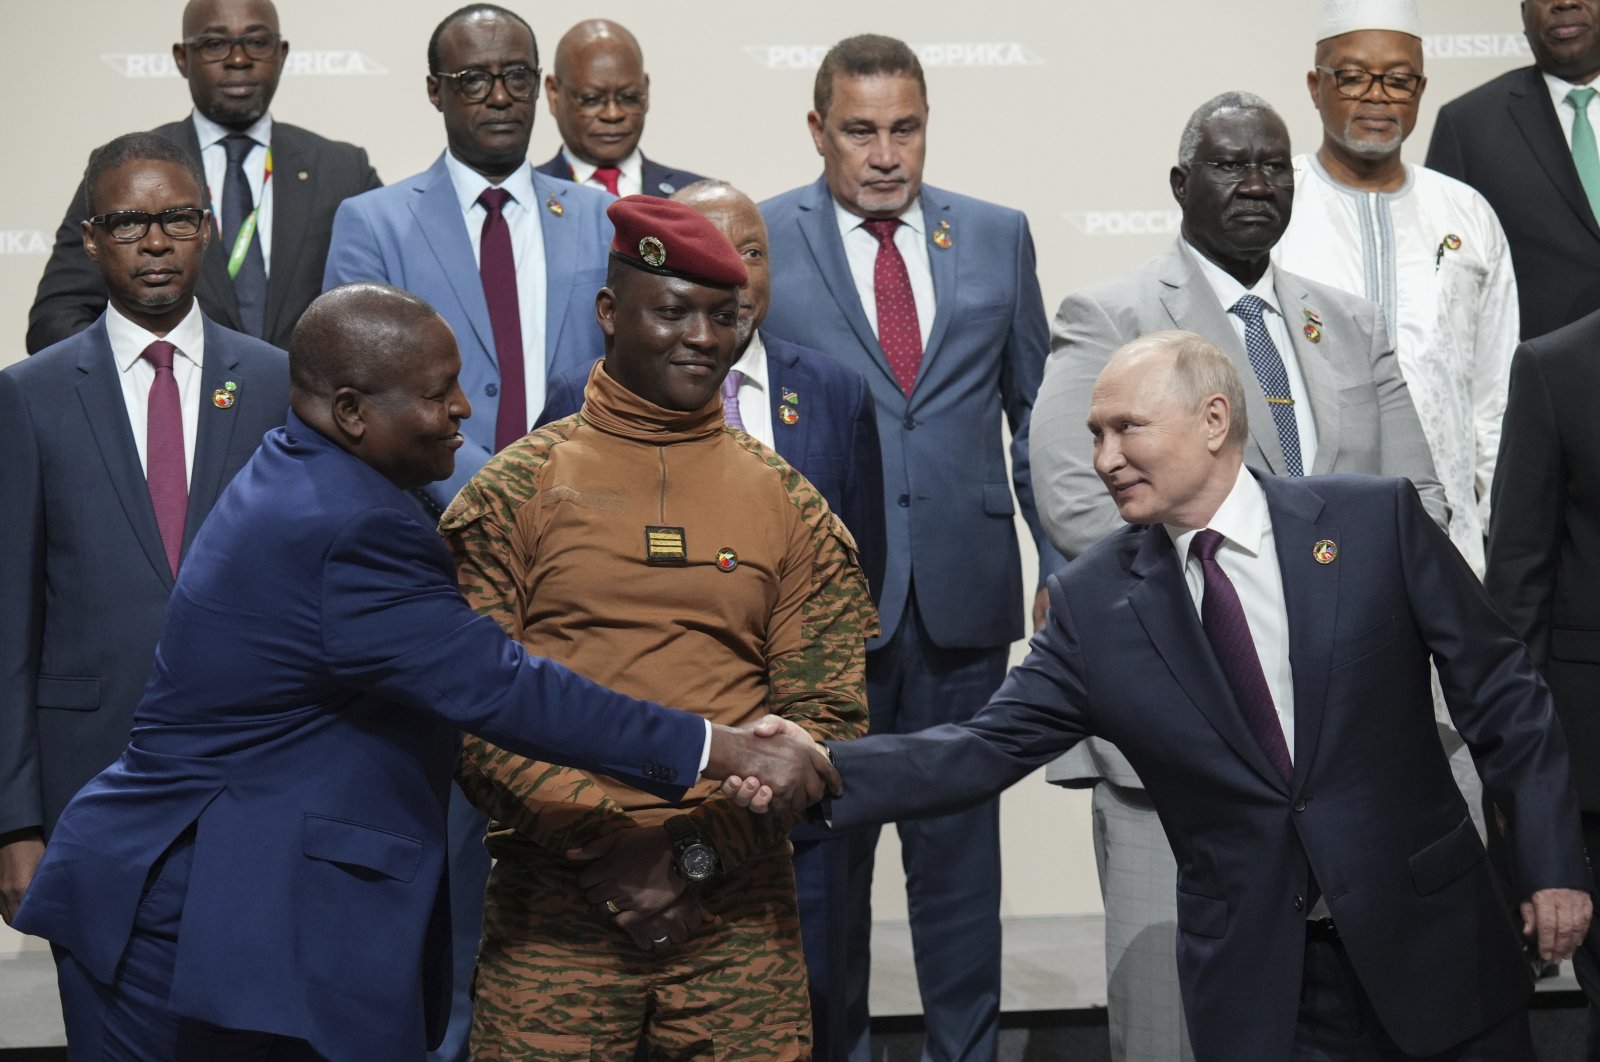 Russian President Vladimir Putin (R) and Mozambique President Filipe Nyusi shake hands during a family photo opportunity during the Russia Africa Summit in St. Petersburg, Russia, July 28, 2023. (AP Photo)